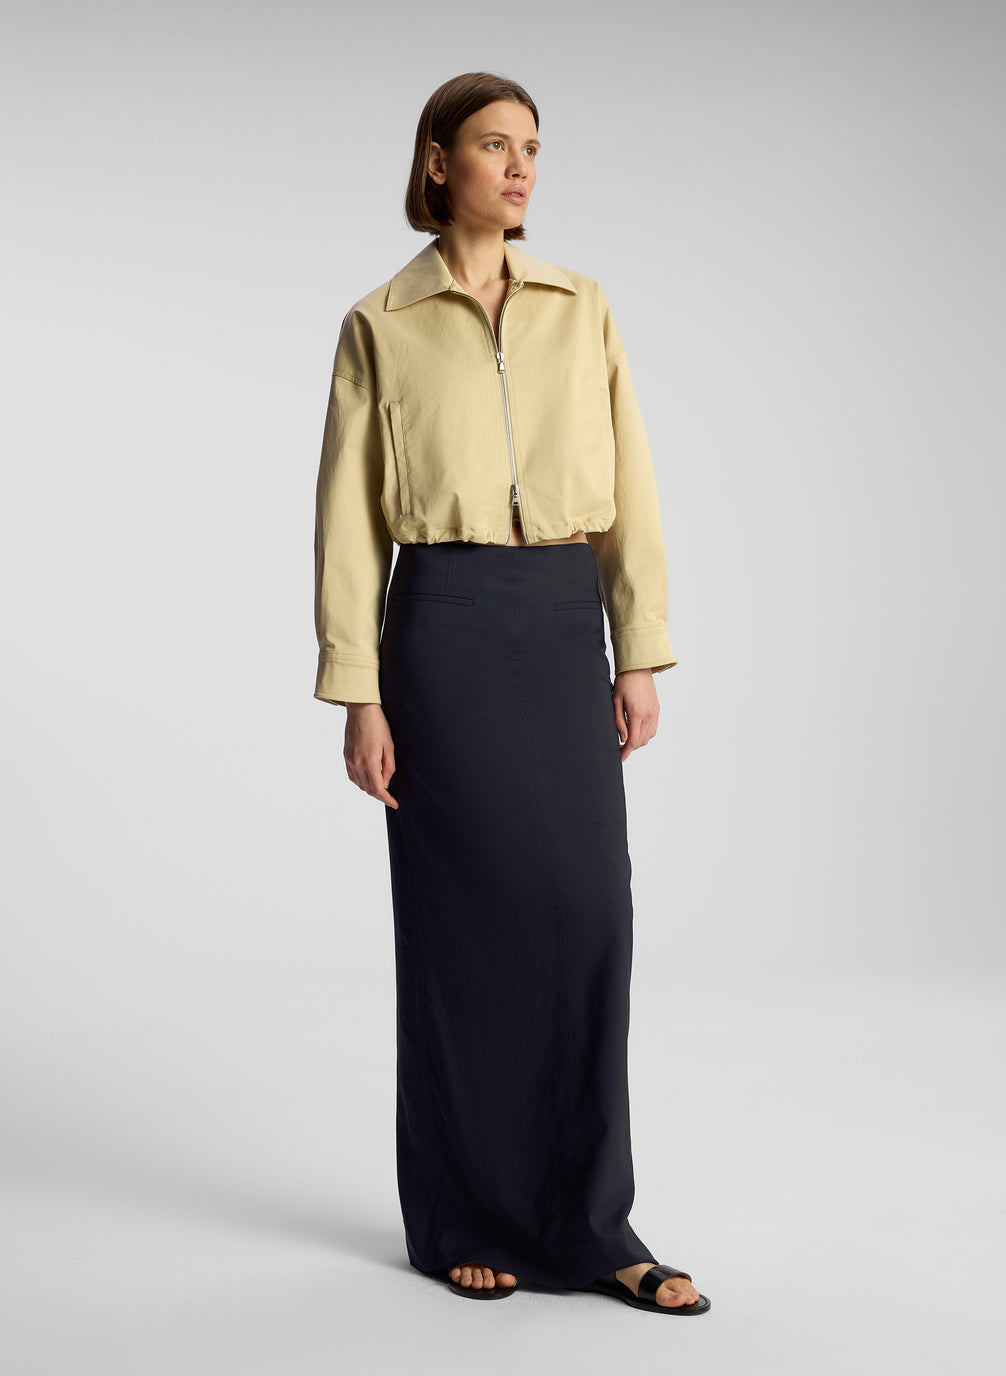 side view of woman wearing tan jacket and navy blue maxi skirt